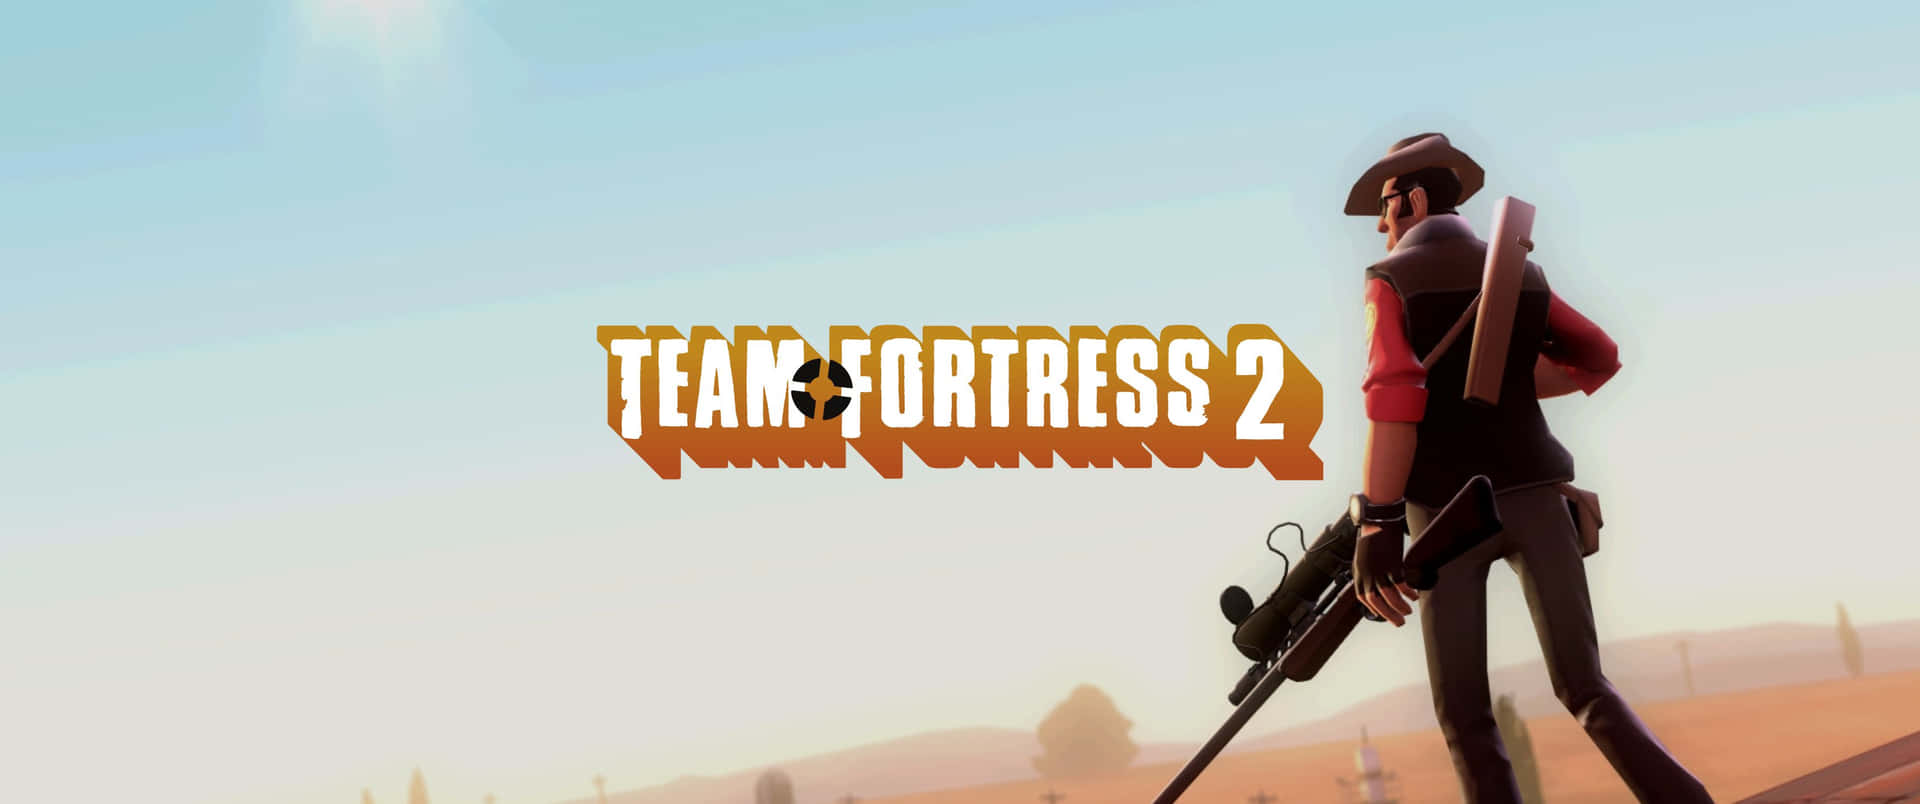 Fun and Action-Packed Team Fortress 2 Wallpaper